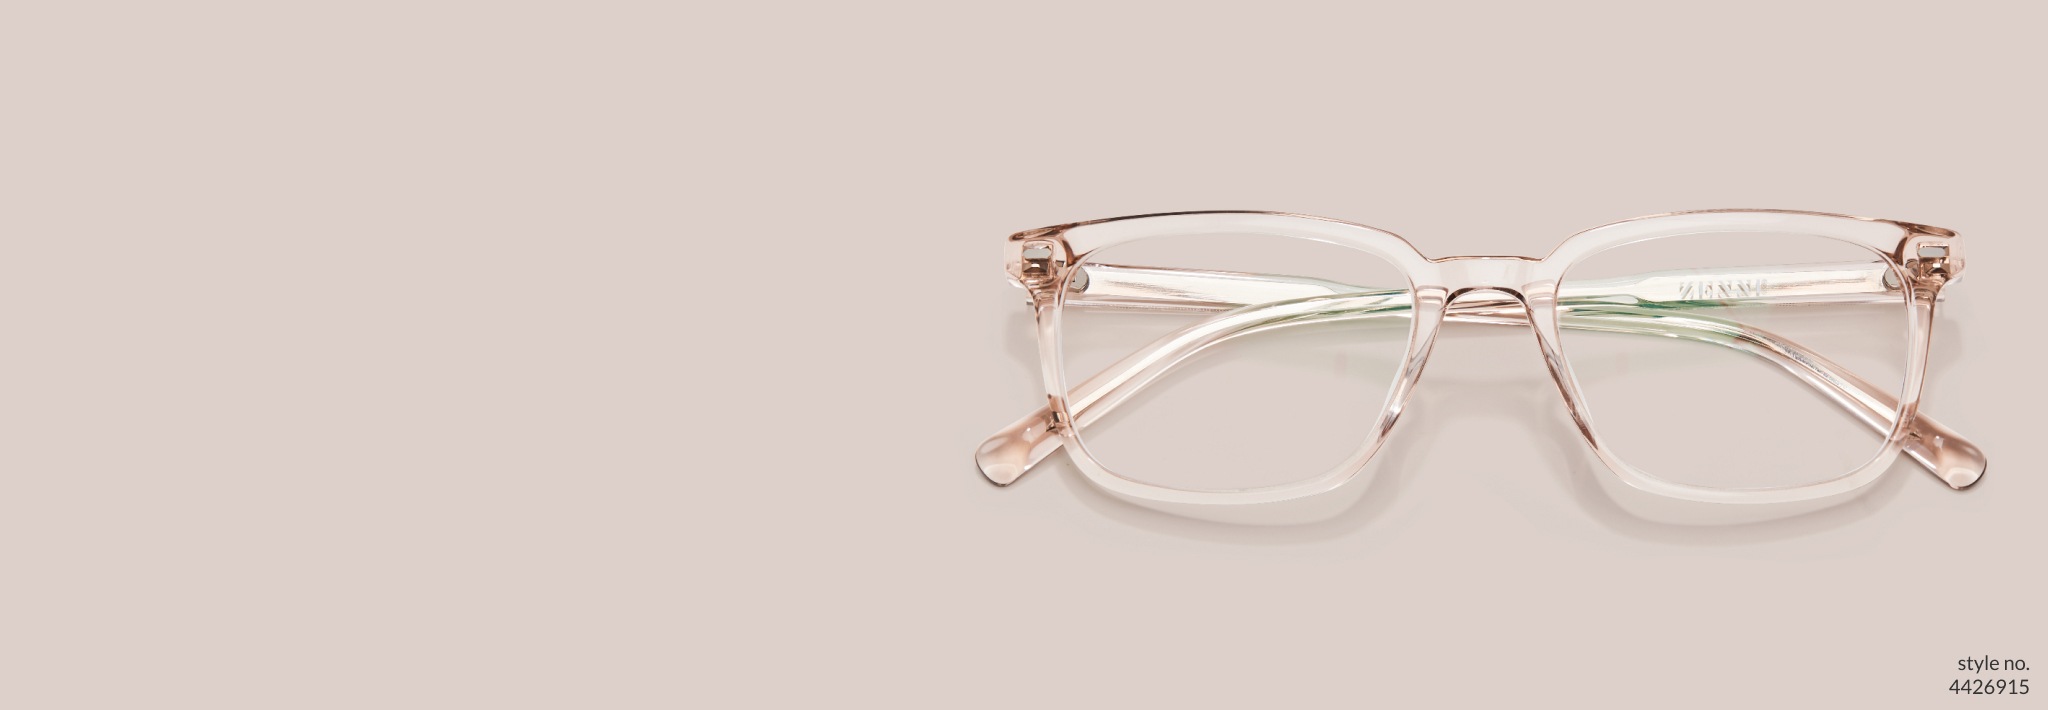 Image of Zenni light brown rectangle glasses #4426915 on a pink beige background.